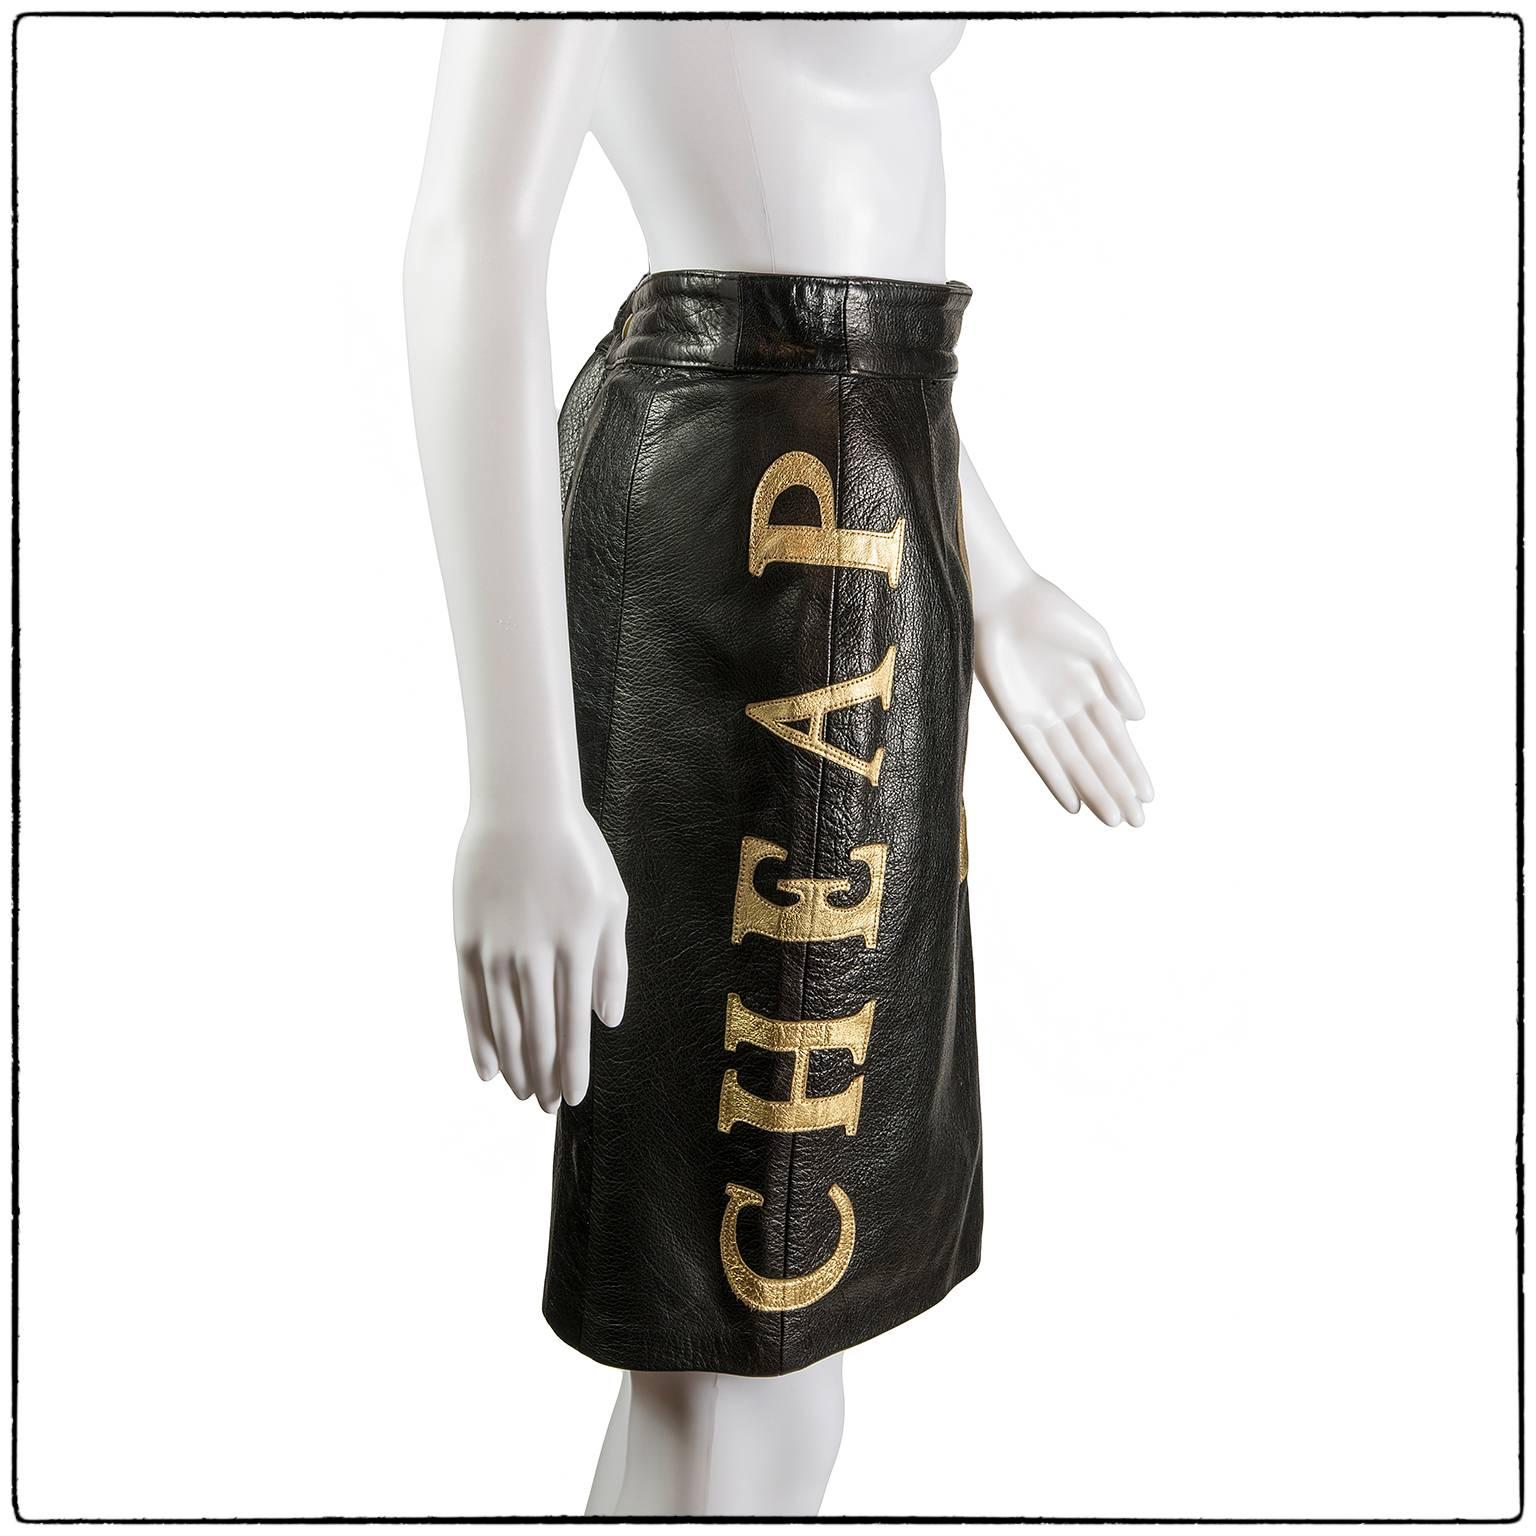 Rare and collectible black leather skirt by Moschino featuring the words “Cheap & Chic” in huge gold lettering, 1990s
This leather skirt has “Cheap & Chic” written all over it in gold leather
Also features a button/zip closure at back and